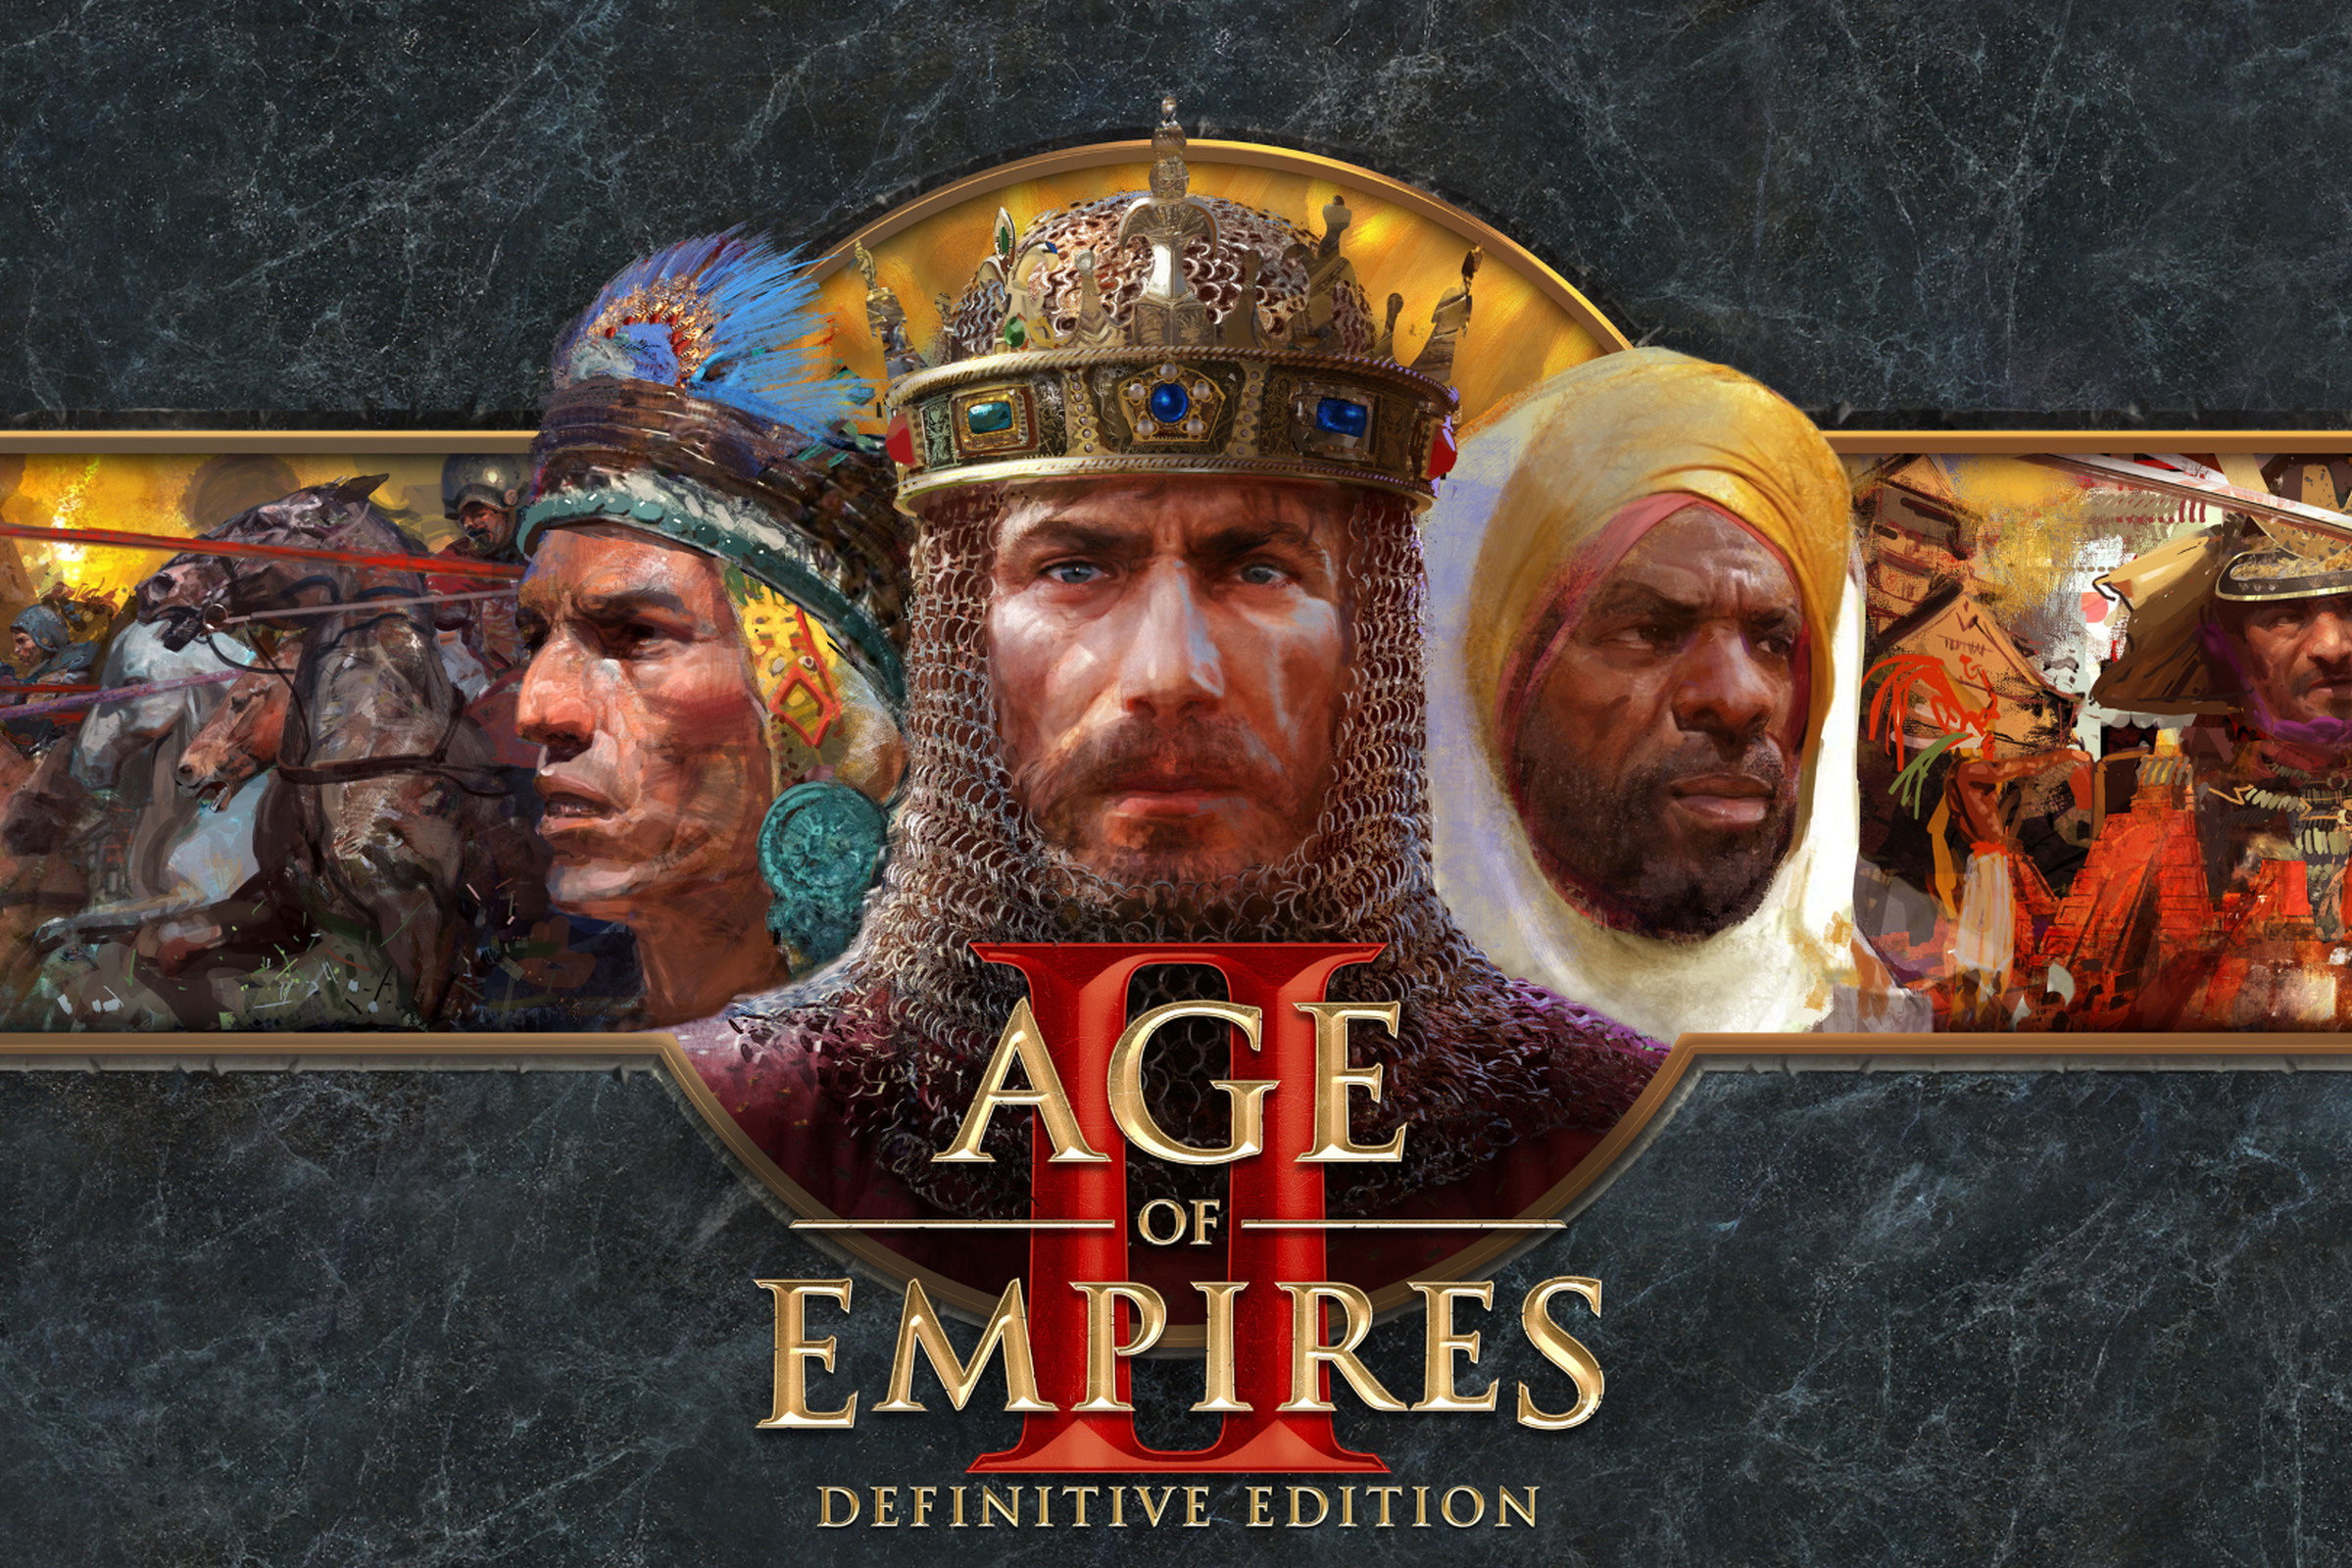 Key art of Age of Empires II: Definitive Edition featuring the heads of three men representing the Aztec, English, and Berber civilzations